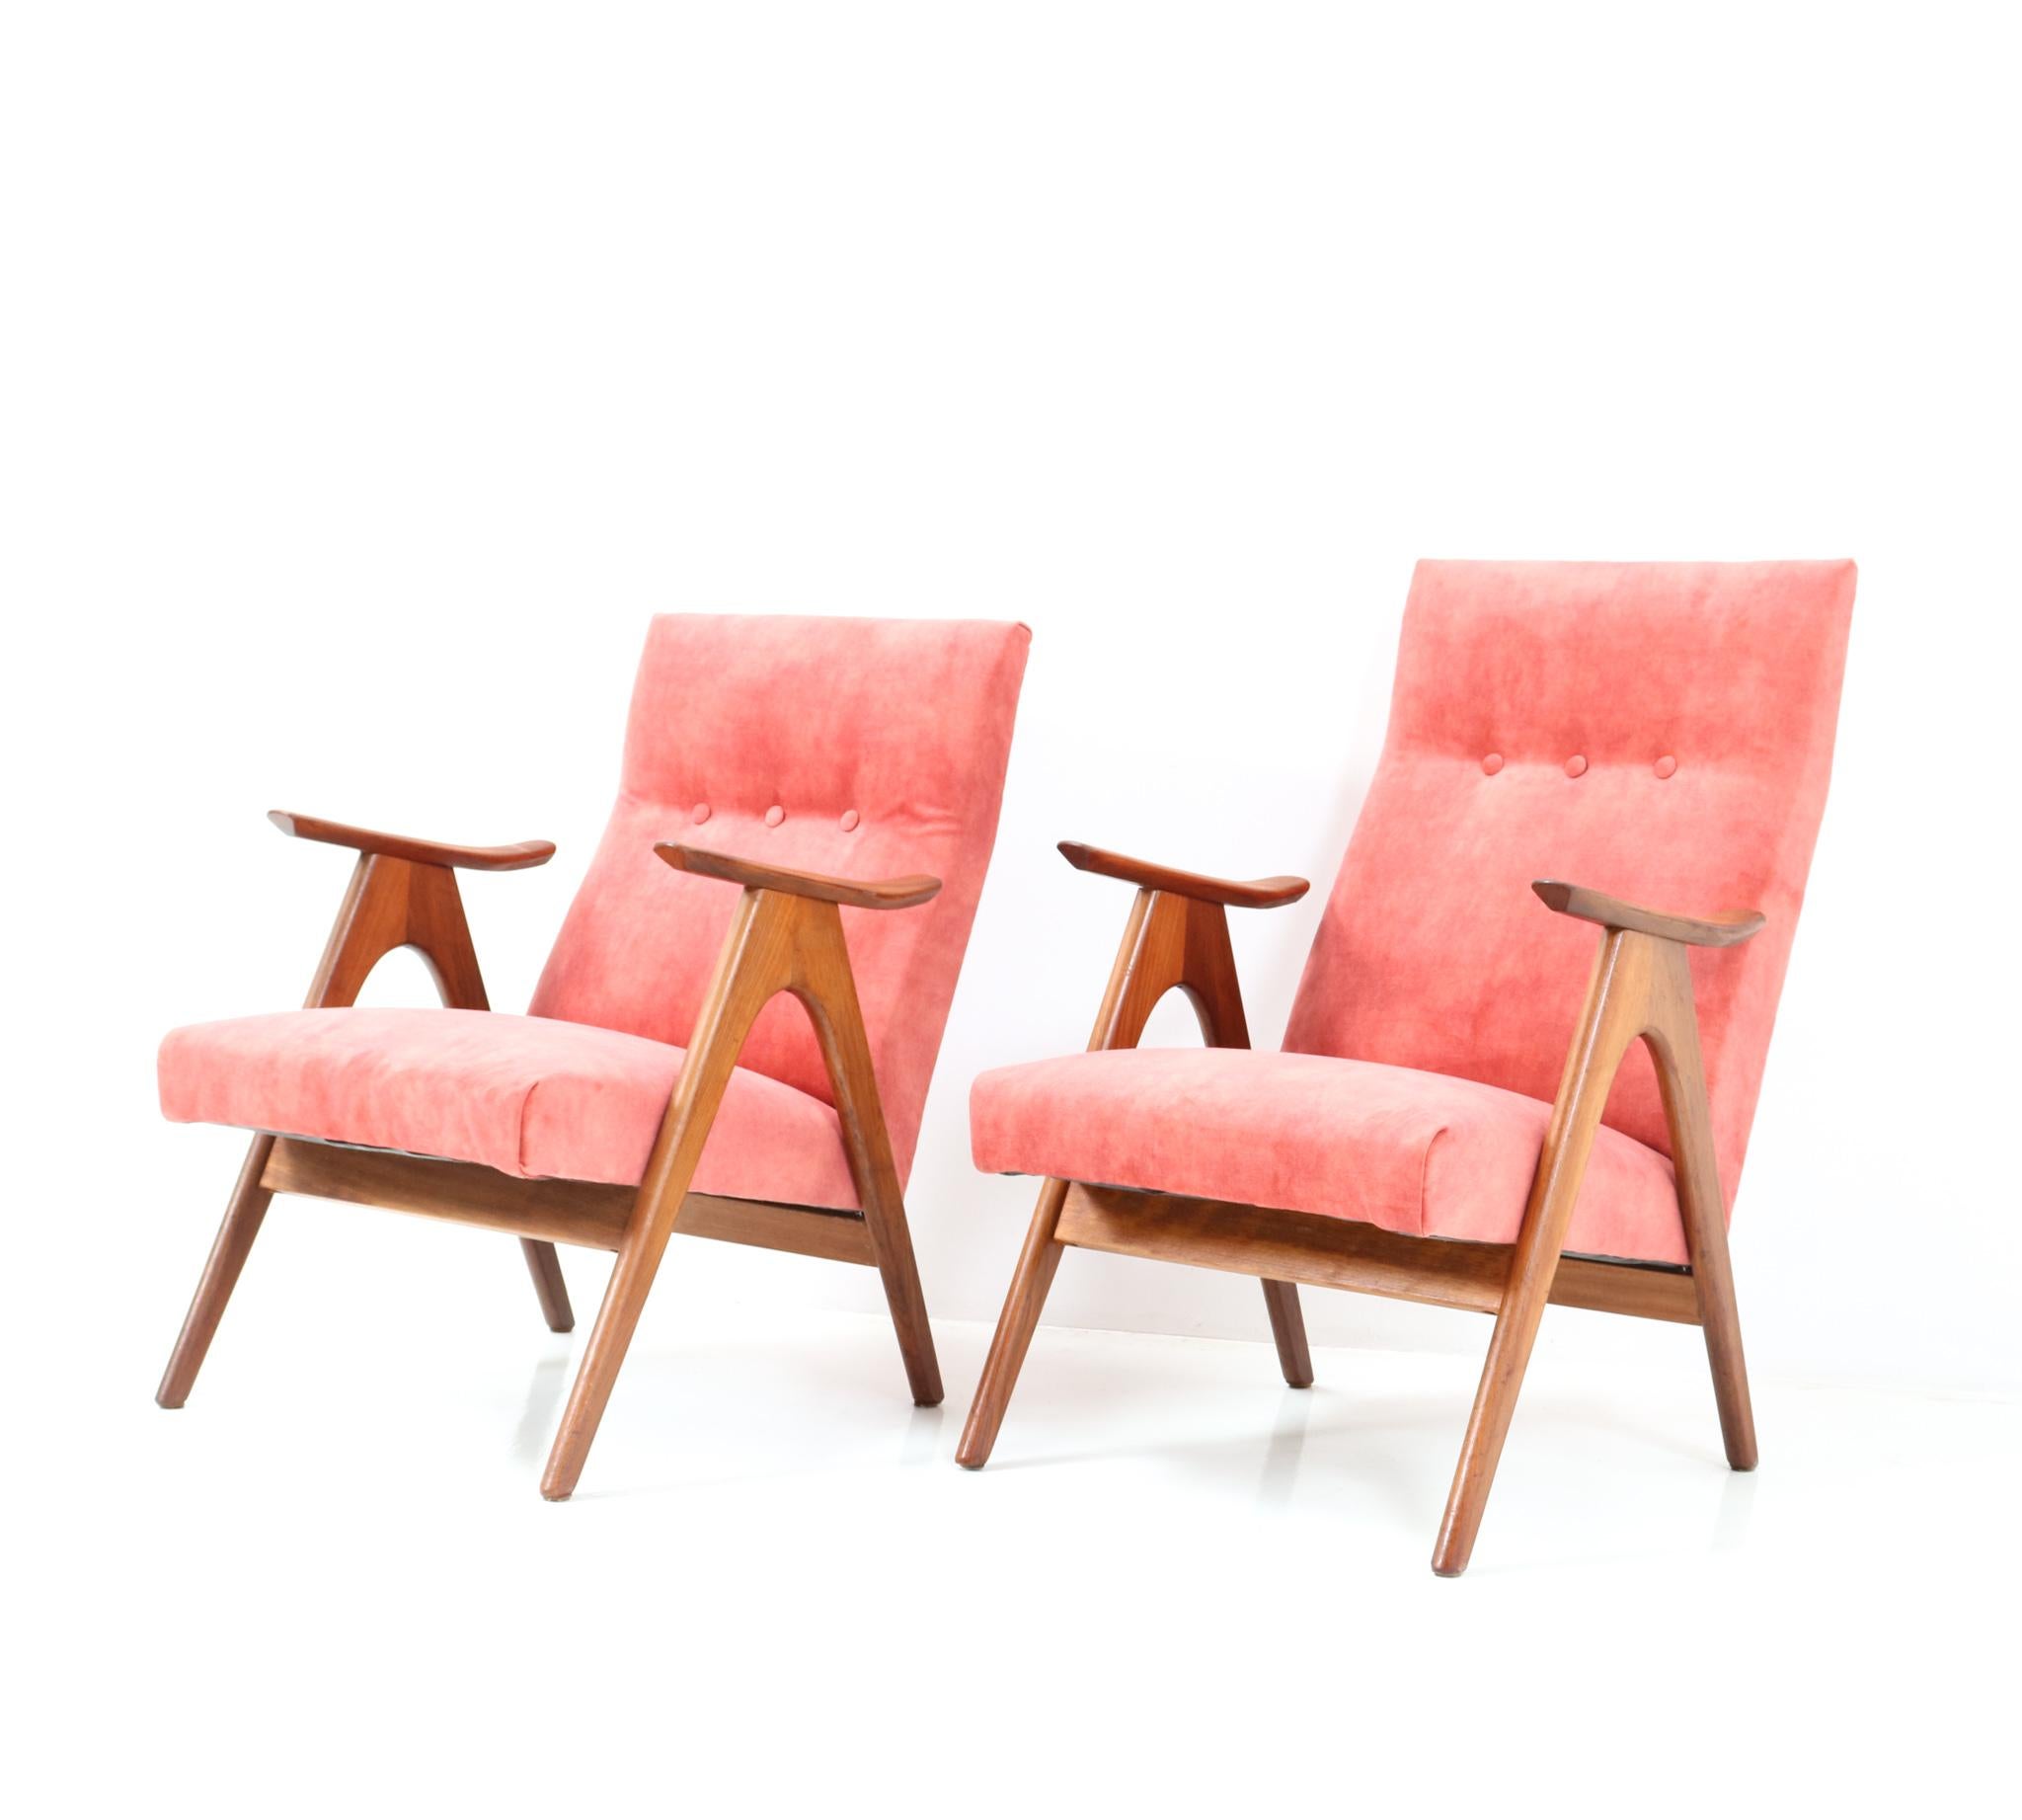 Stunning and elegant pair of Mid-Century Modern lounge chairs.
Striking Dutch design from the 1960s.
Solid teak frames and re-upholstered with a velvet kind of fabric.
Dimensions of the ladies chair: H: 80,5 cm or 31.69 in.W: 60.5 cm or 23.82